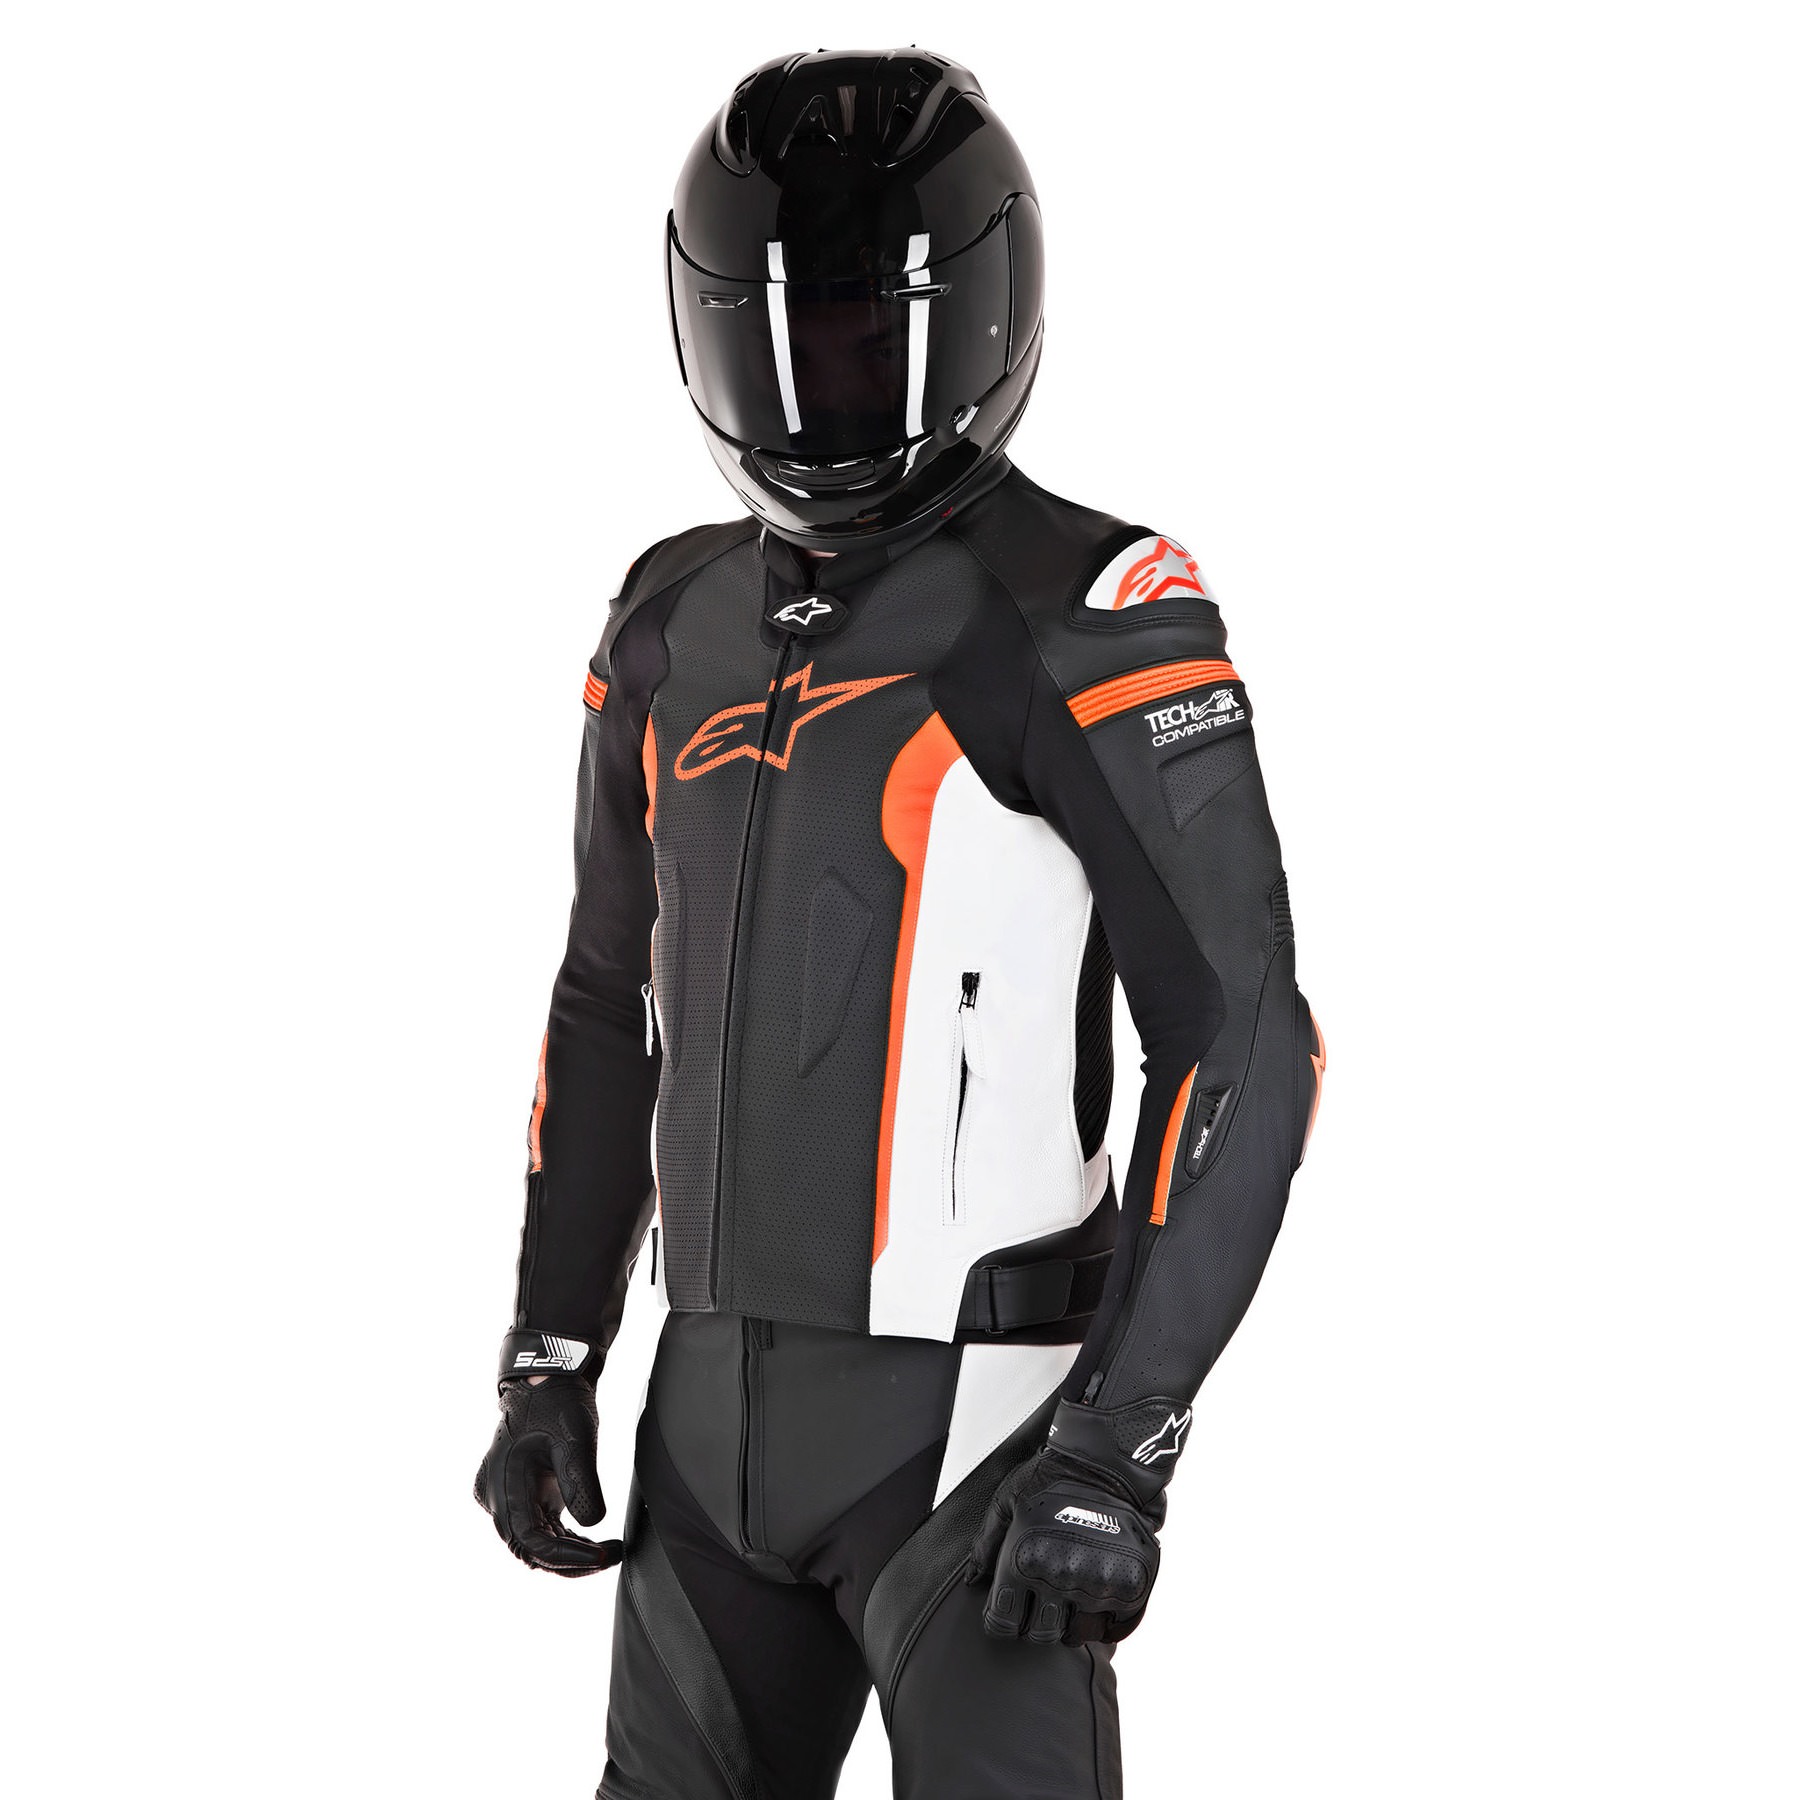 Buy Avro 4 Leather Jacket | Louis motorcycle clothing and 